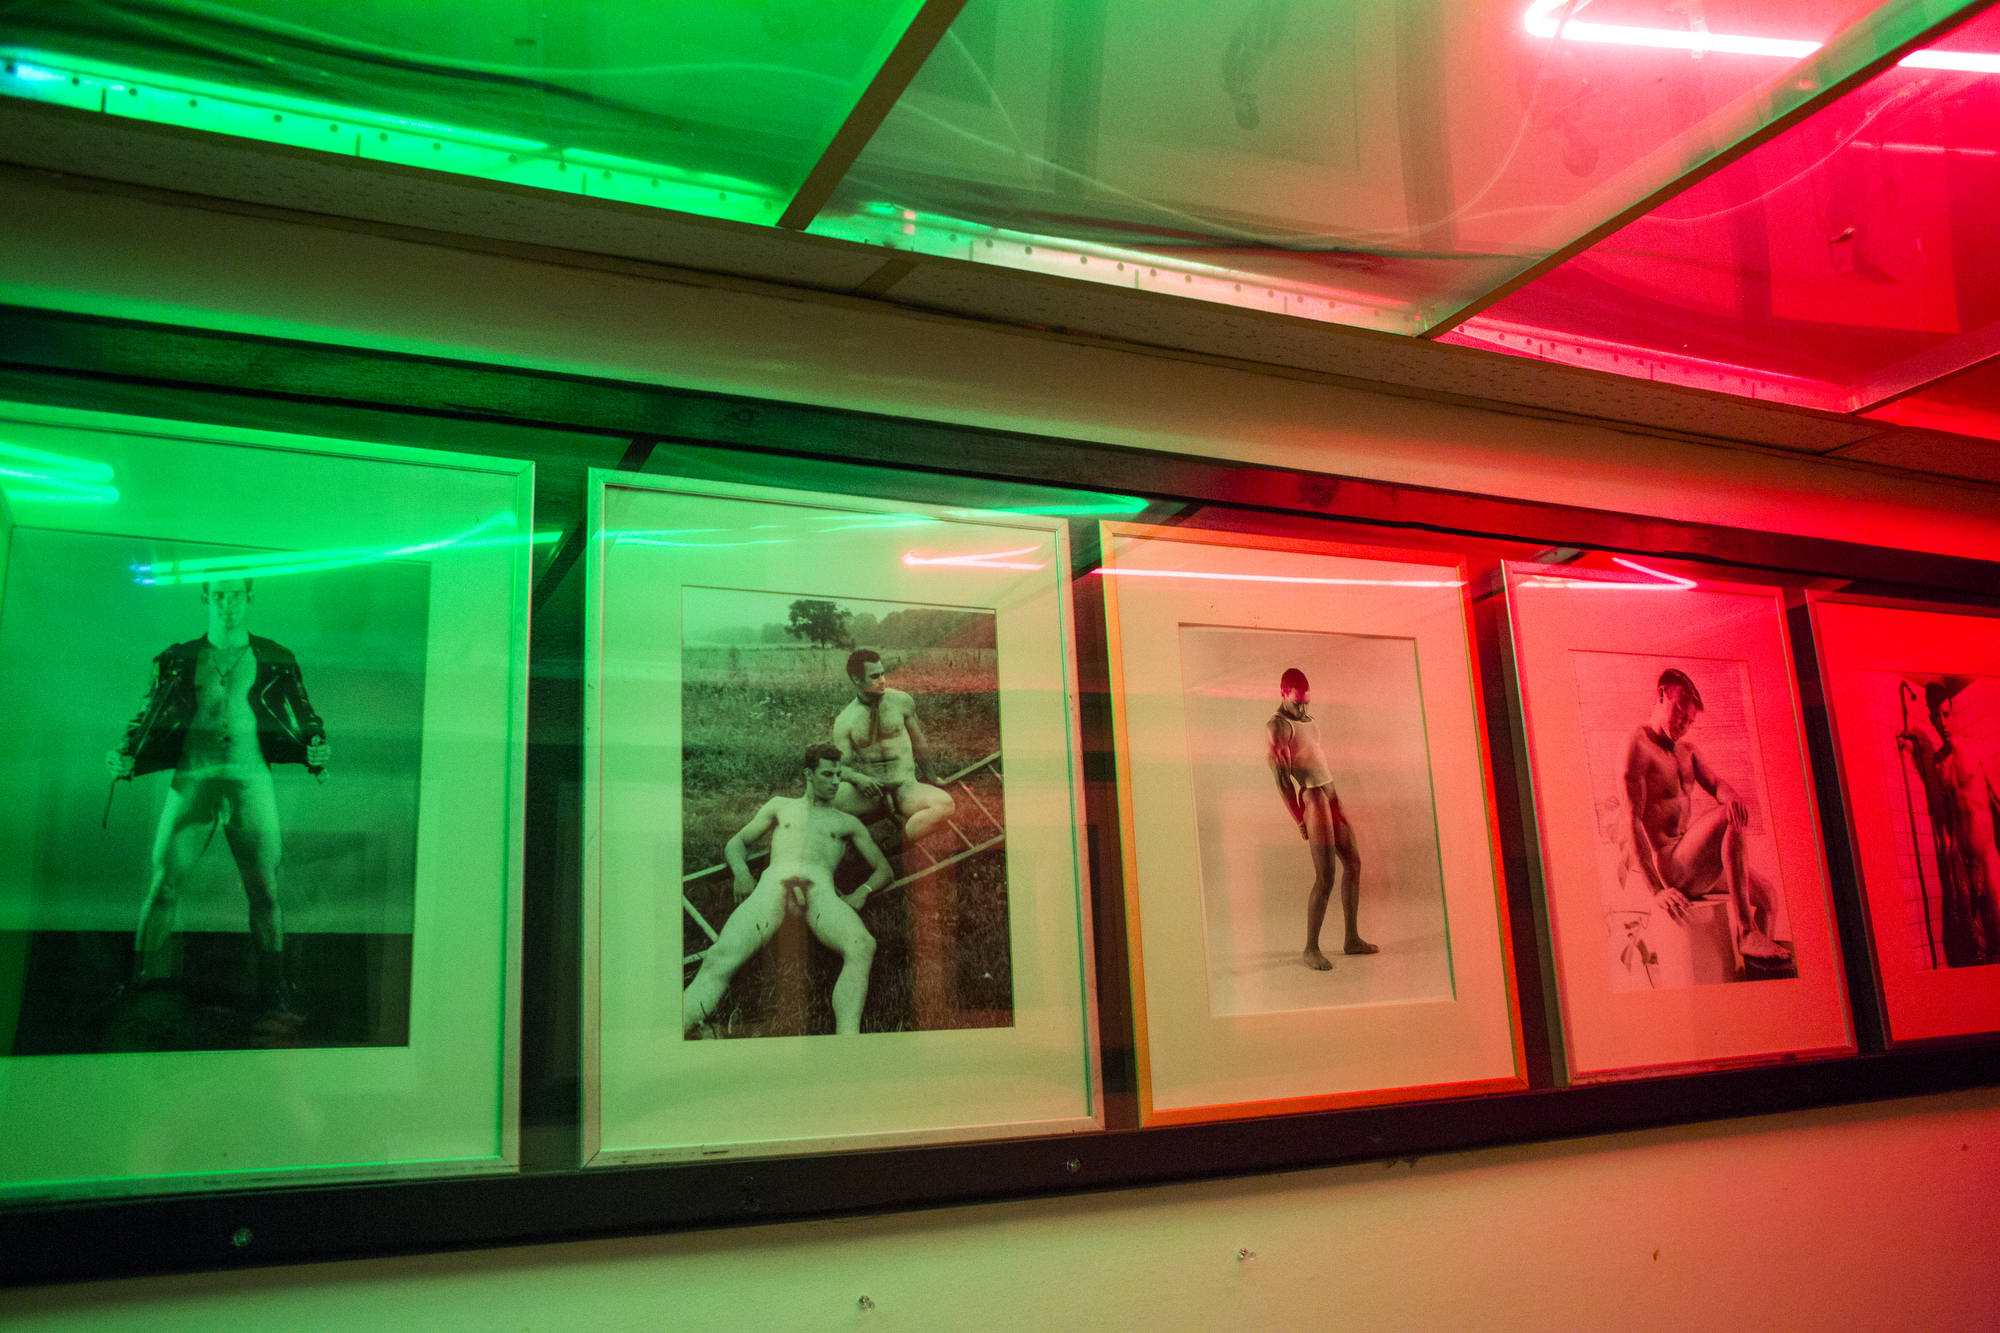  The Late Chuck Renslow, the original owner of Man's Country, the longest running gay bathhouse in Chicago, was a prolific art collector and photographer. By New Years Eve, much of the art has been bought, donated to his own Leather Archives and Muse